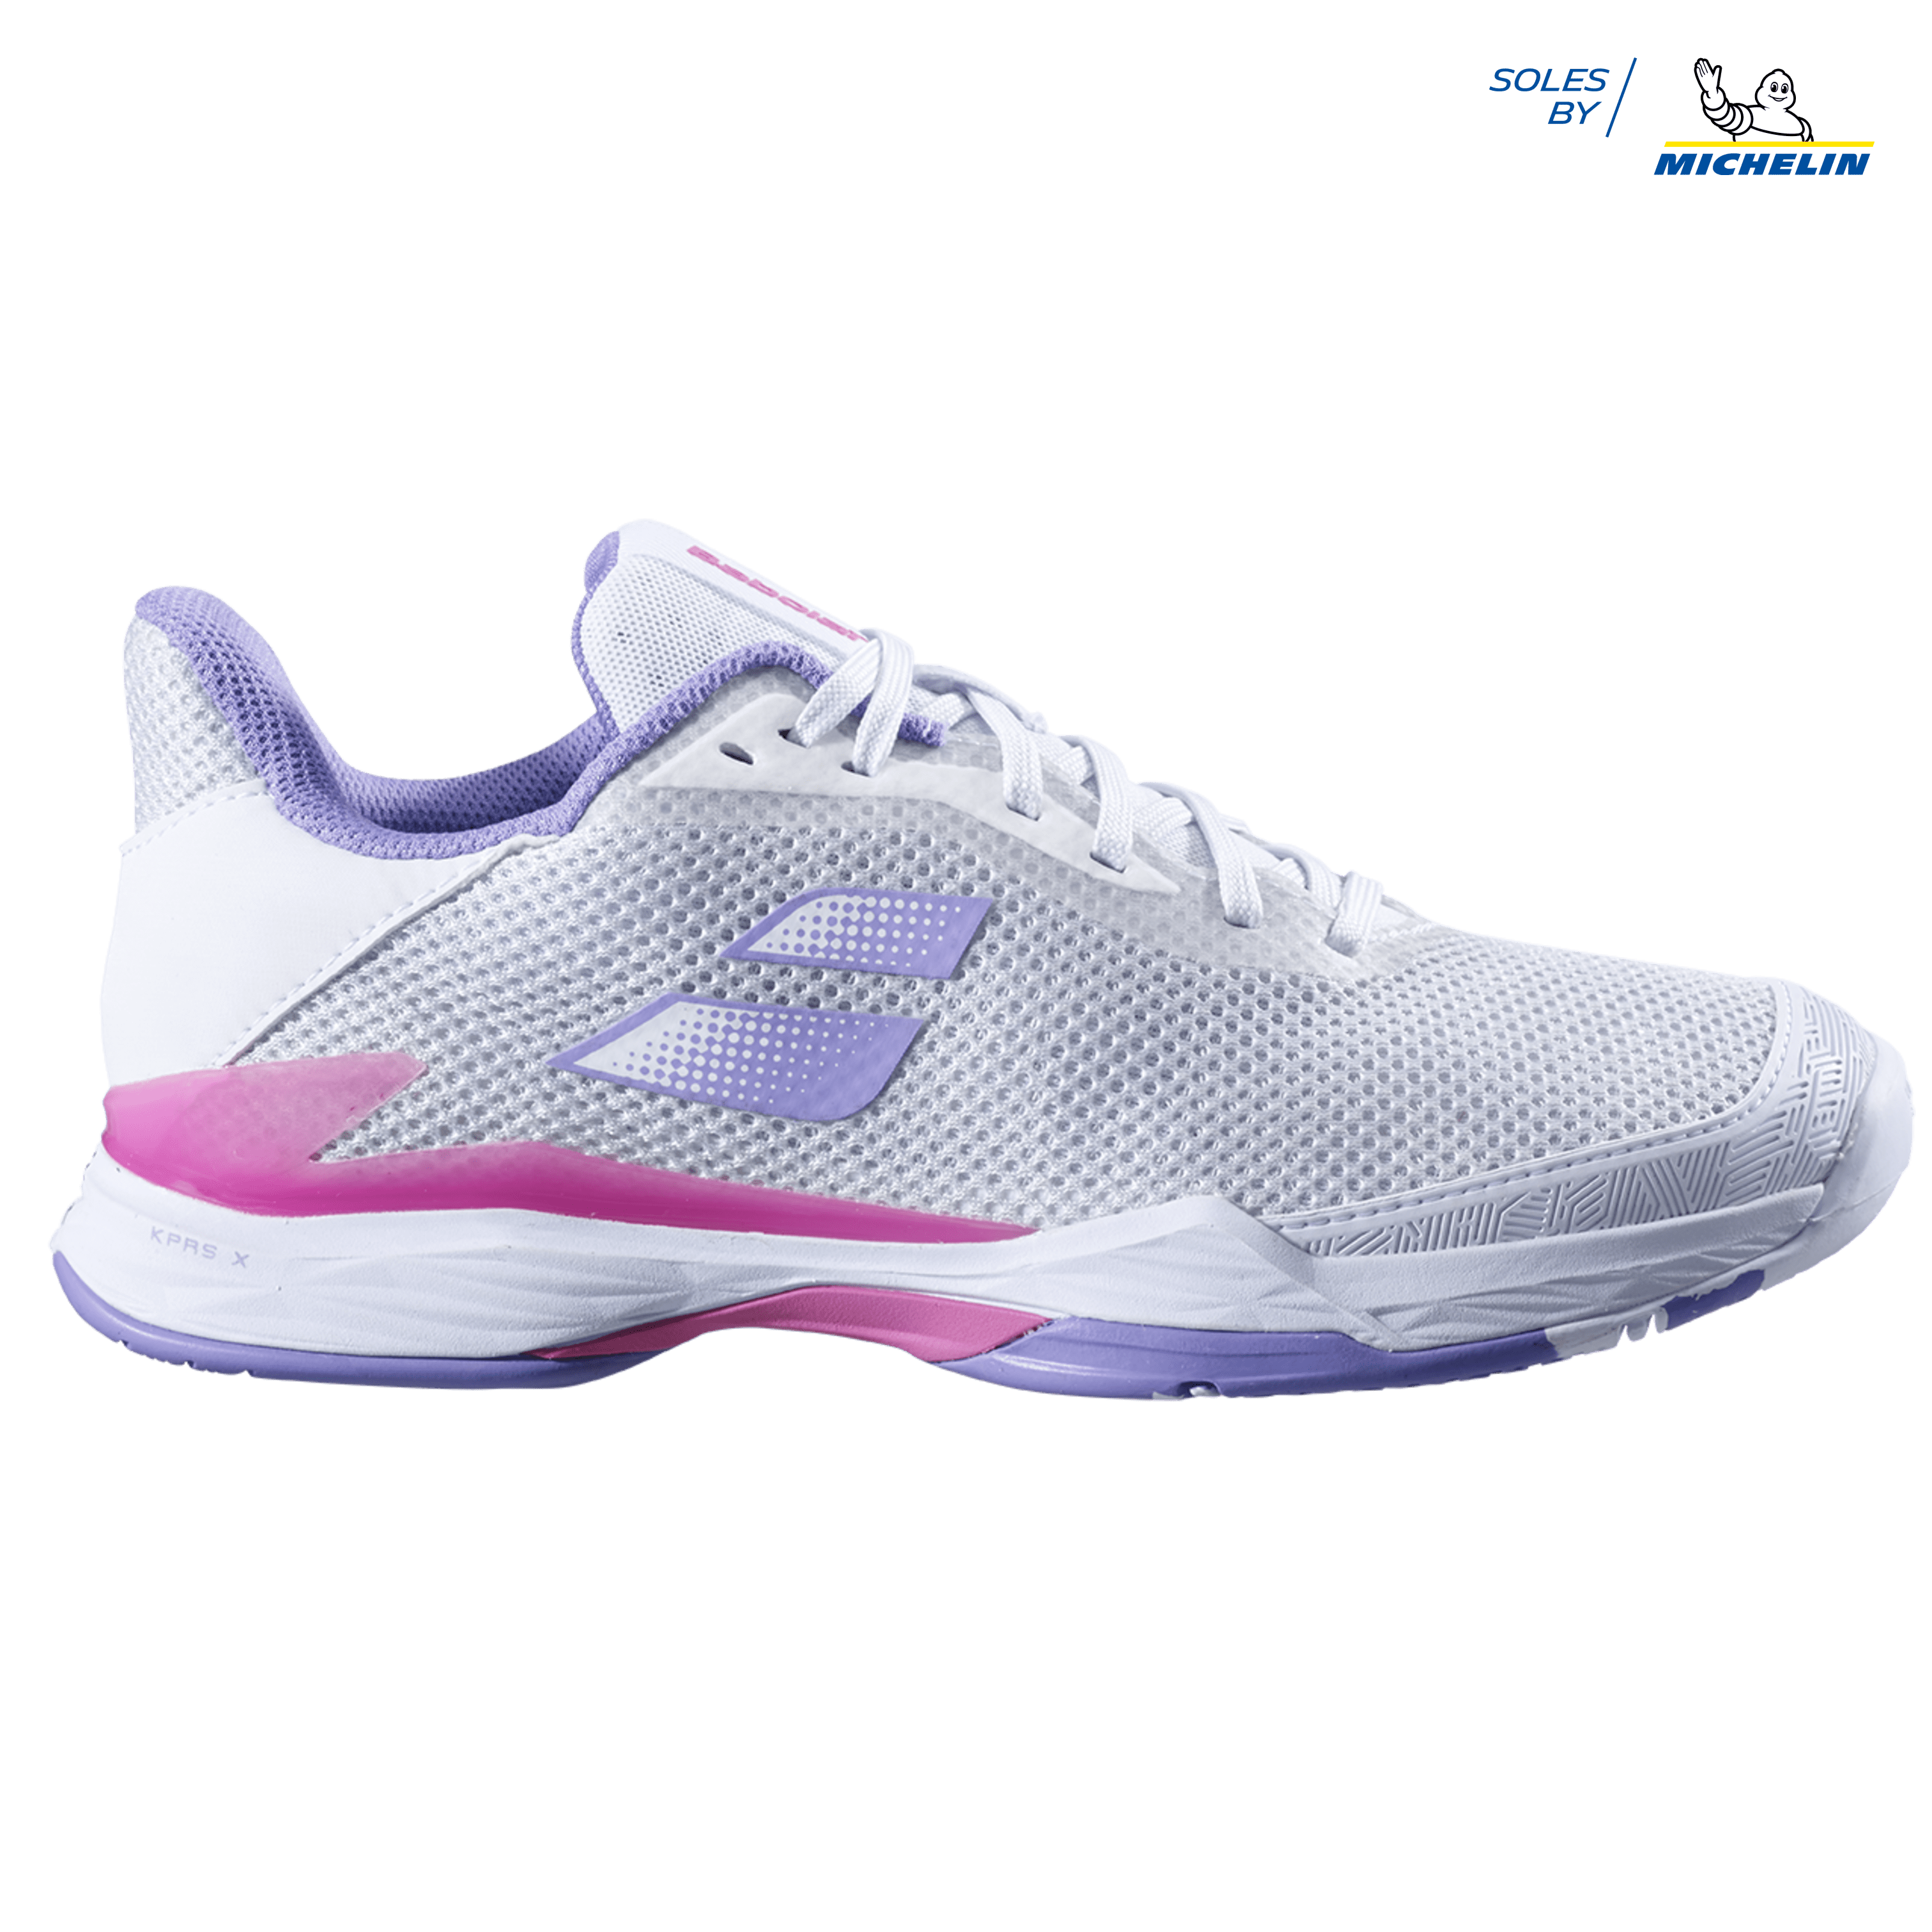 Huh Receiving machine whip Tennis shoes | Jet Tere All Court Women | Babolat